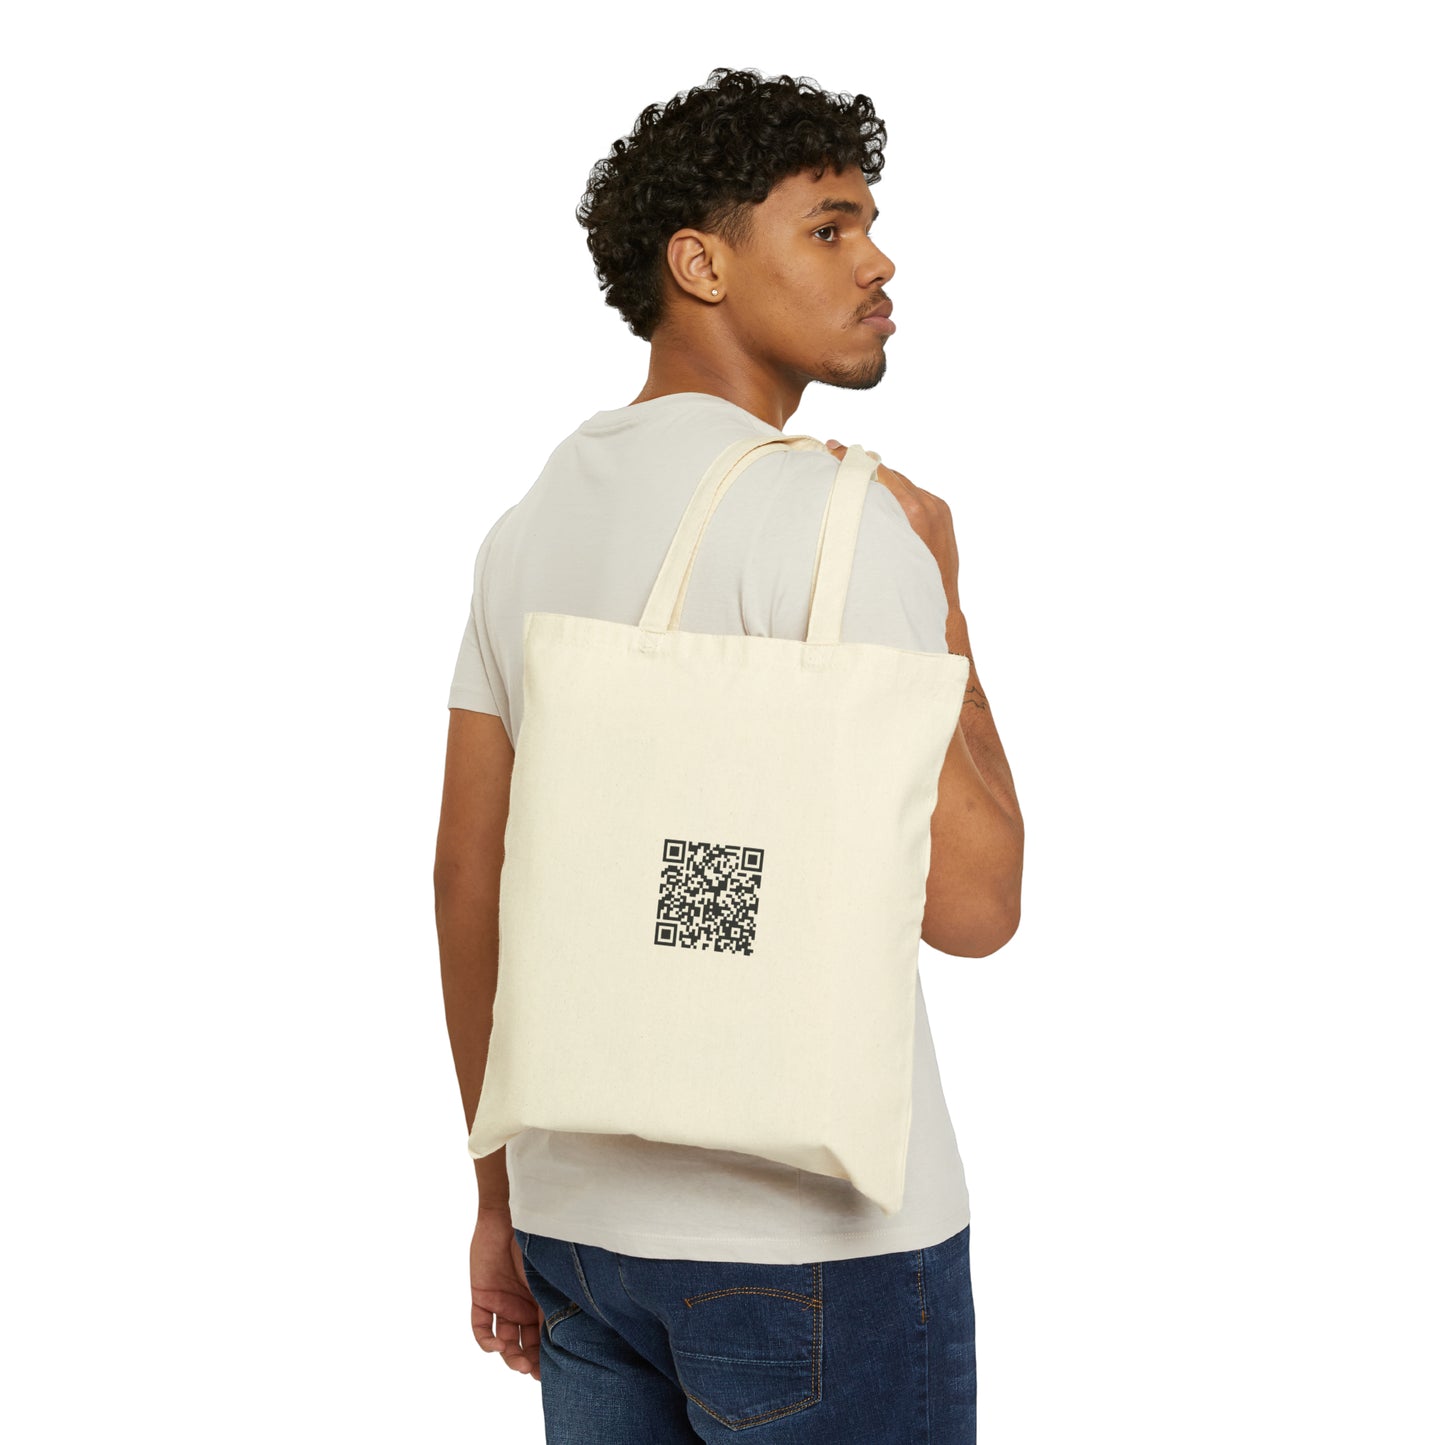 While The Emperor Slept - Cotton Canvas Tote Bag